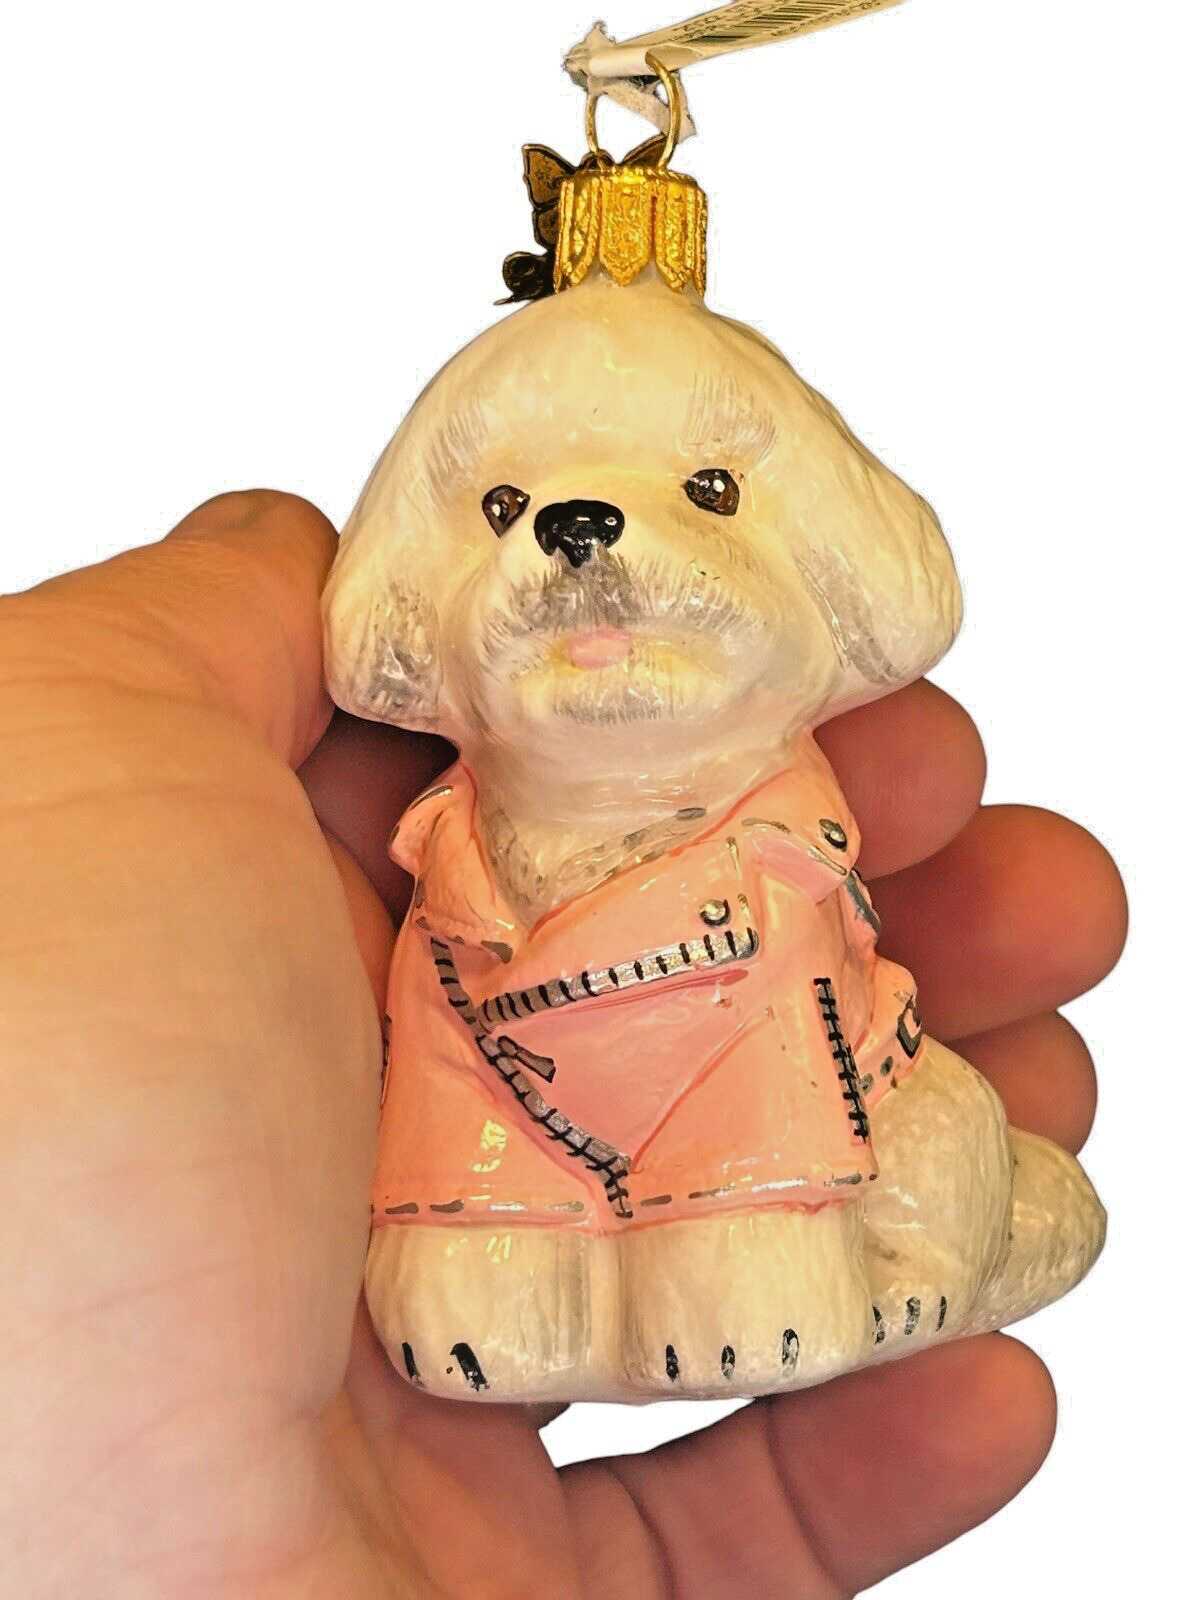 Joy To The World Neiman Marcus Bichon Frise Pink Leather Jacket Ornament w Tag